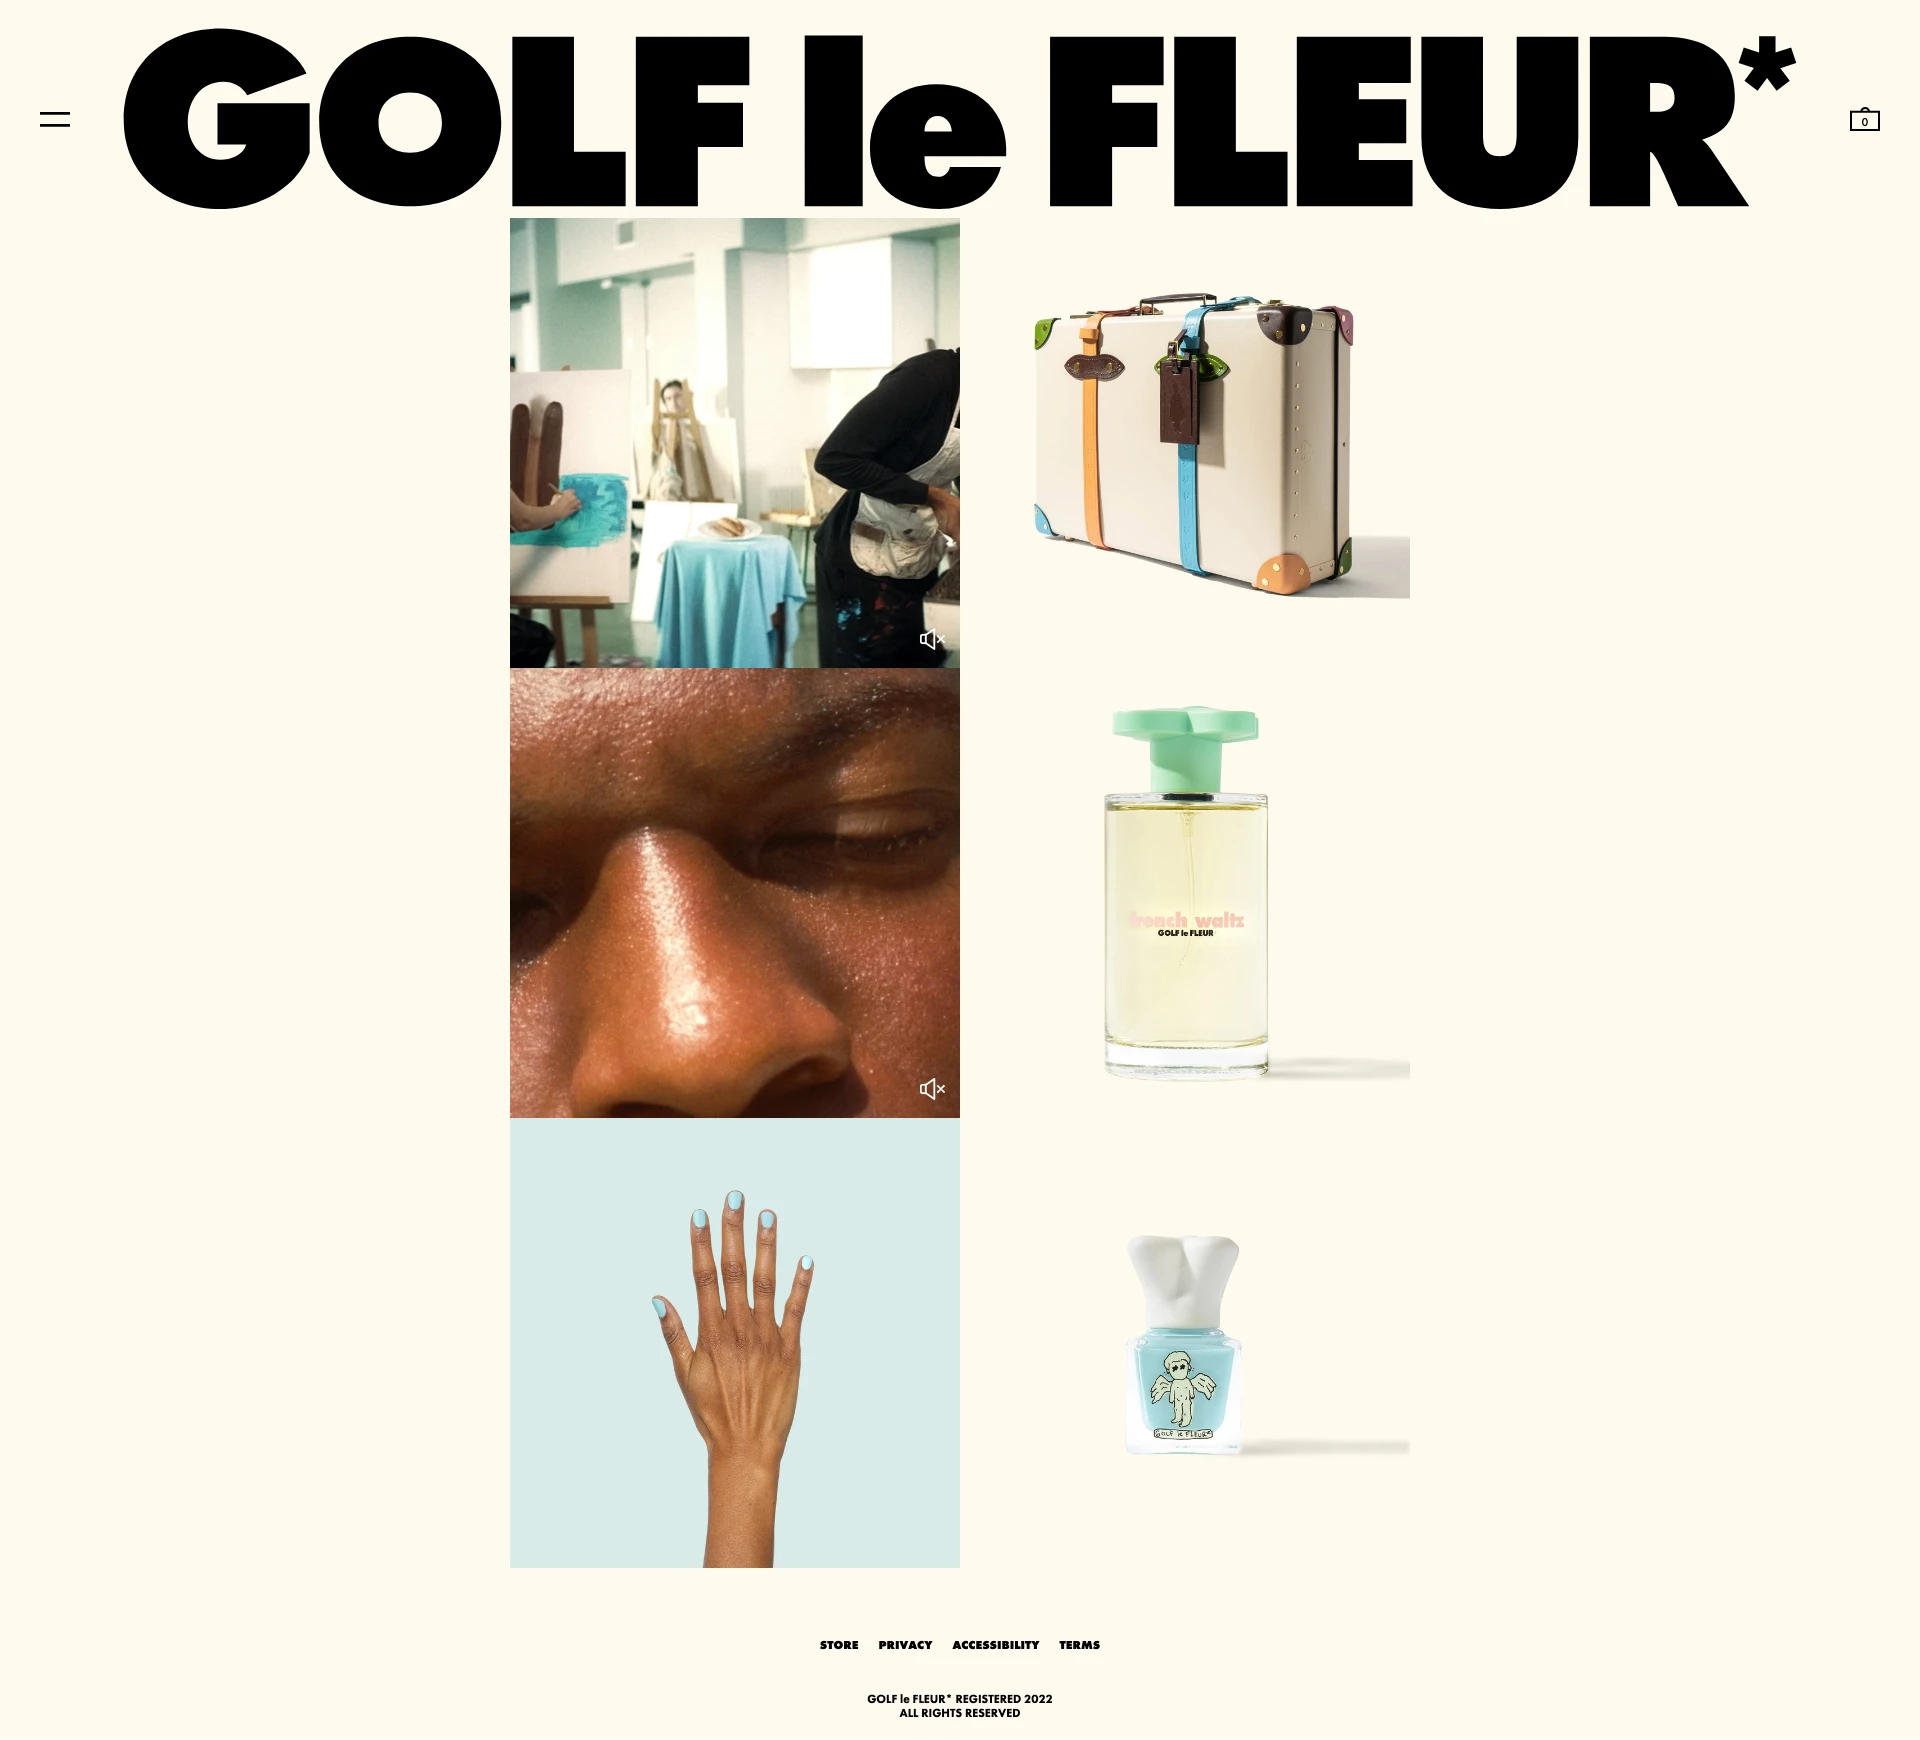 GOLF le FLEUR* Landing Page Example: Serious fashion, a wavy new store, and a fancy fragrance.